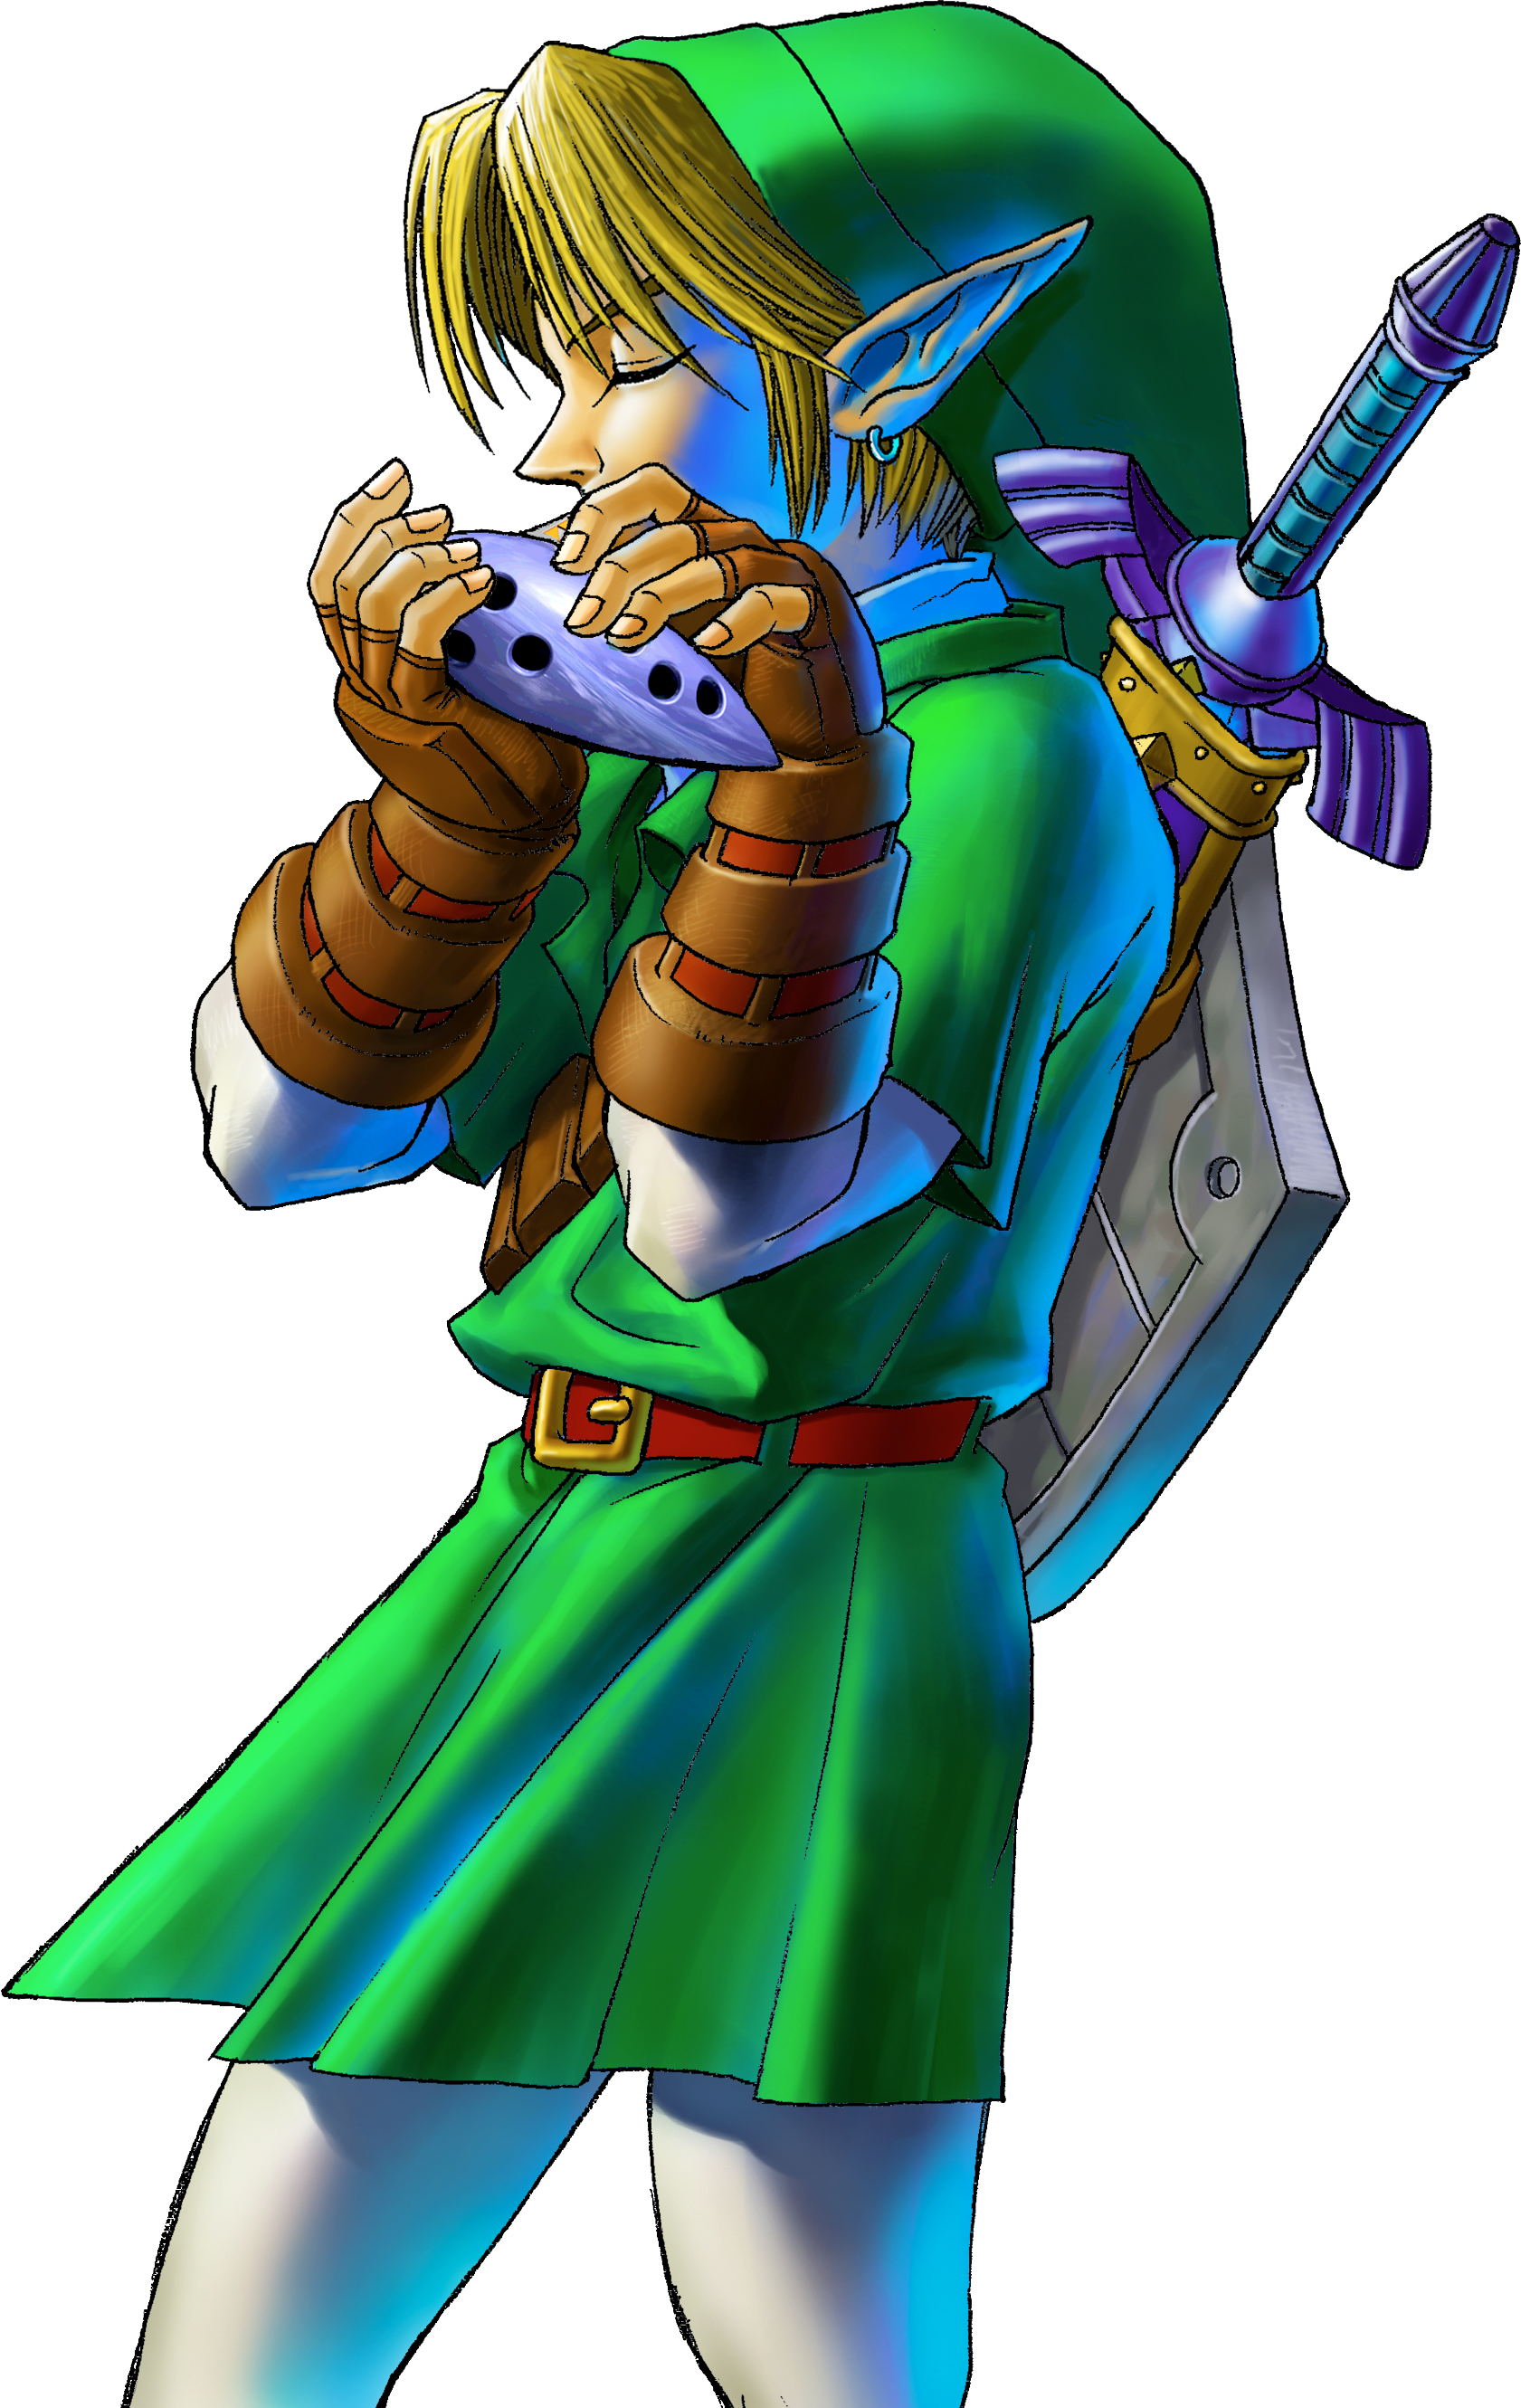 http://images3.wikia.nocookie.net/__cb20091217212911/zelda/images/d/d4/Link_Playing_Ocarina_(Ocarina_of_Time).png